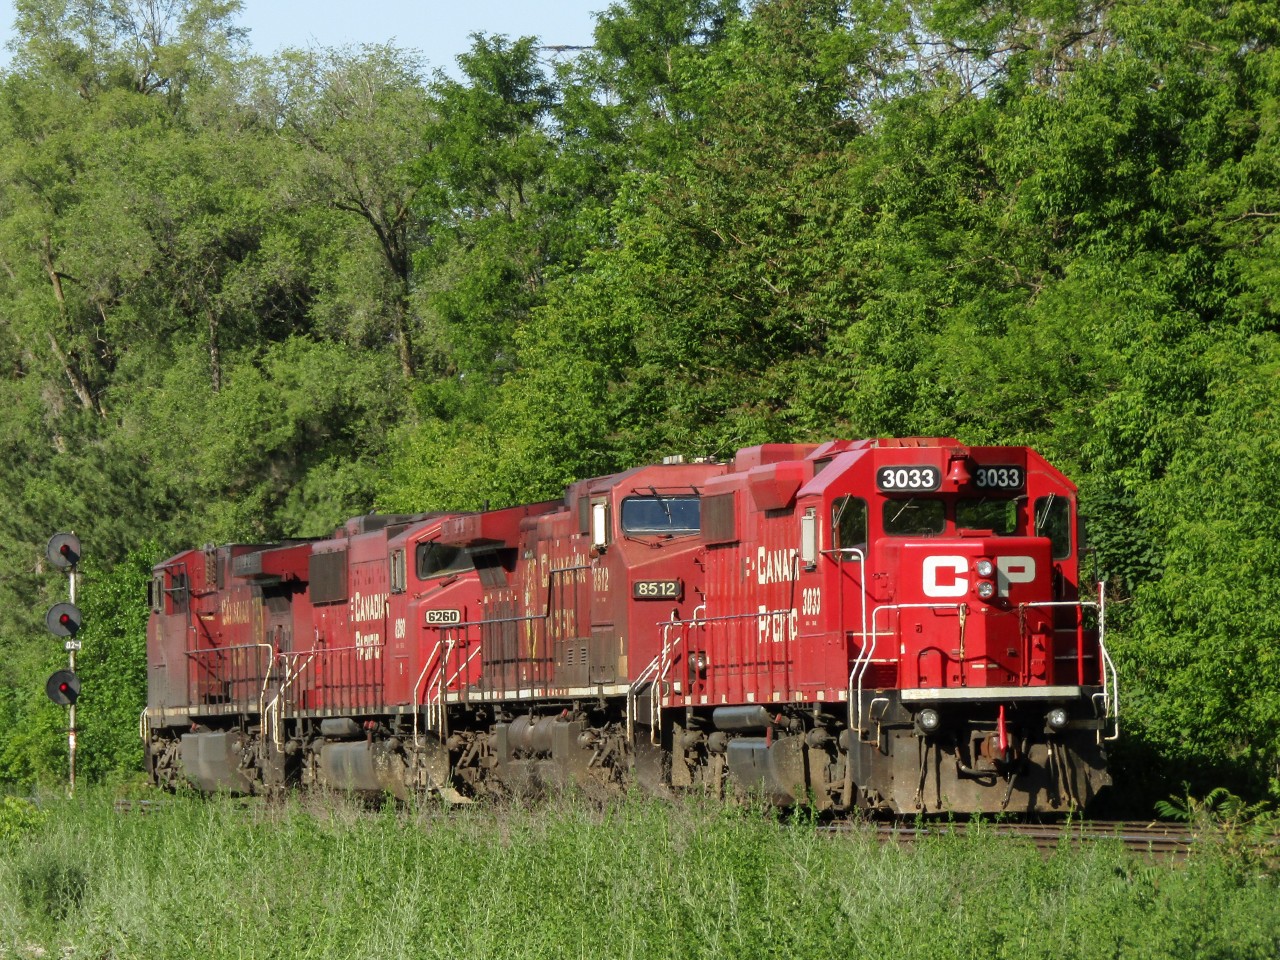 CP 244 waits patiently for a light to proceed eastbound at Leaside. CP 8524 leads, but due to lighting, a good shot was not possible. But CP 3033 was nose out, and there were no cars on this train, the illusion of CP 3033 leading can be made. CP 8524, CP 6260, CP 8512, CP 3033 are on the power move to Toronto.